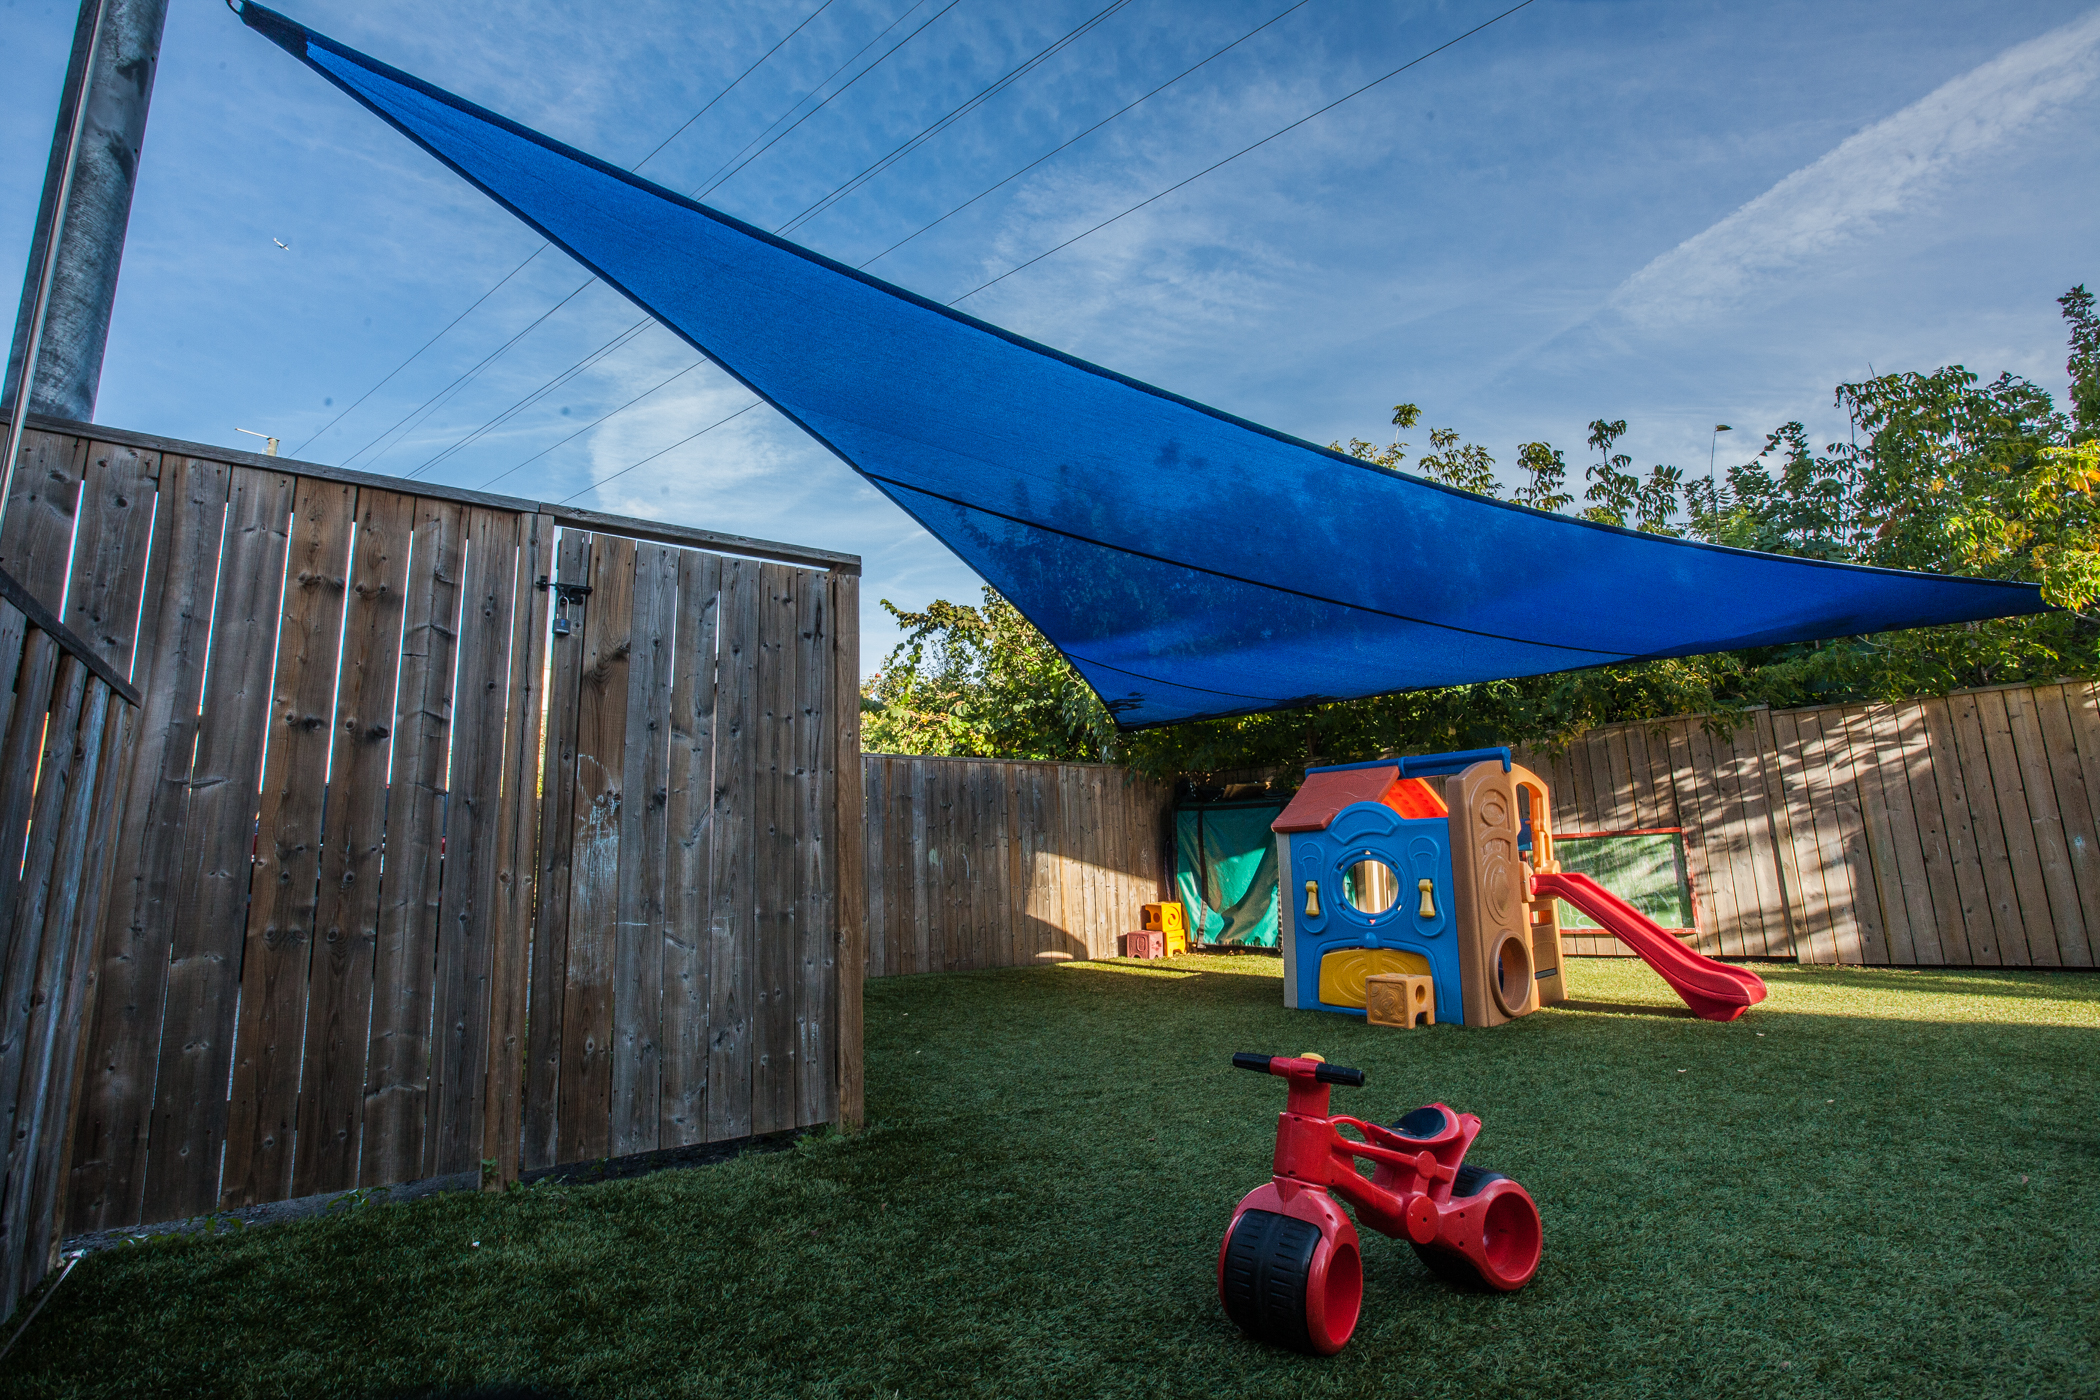 What are the benefits of indoor playgrounds?